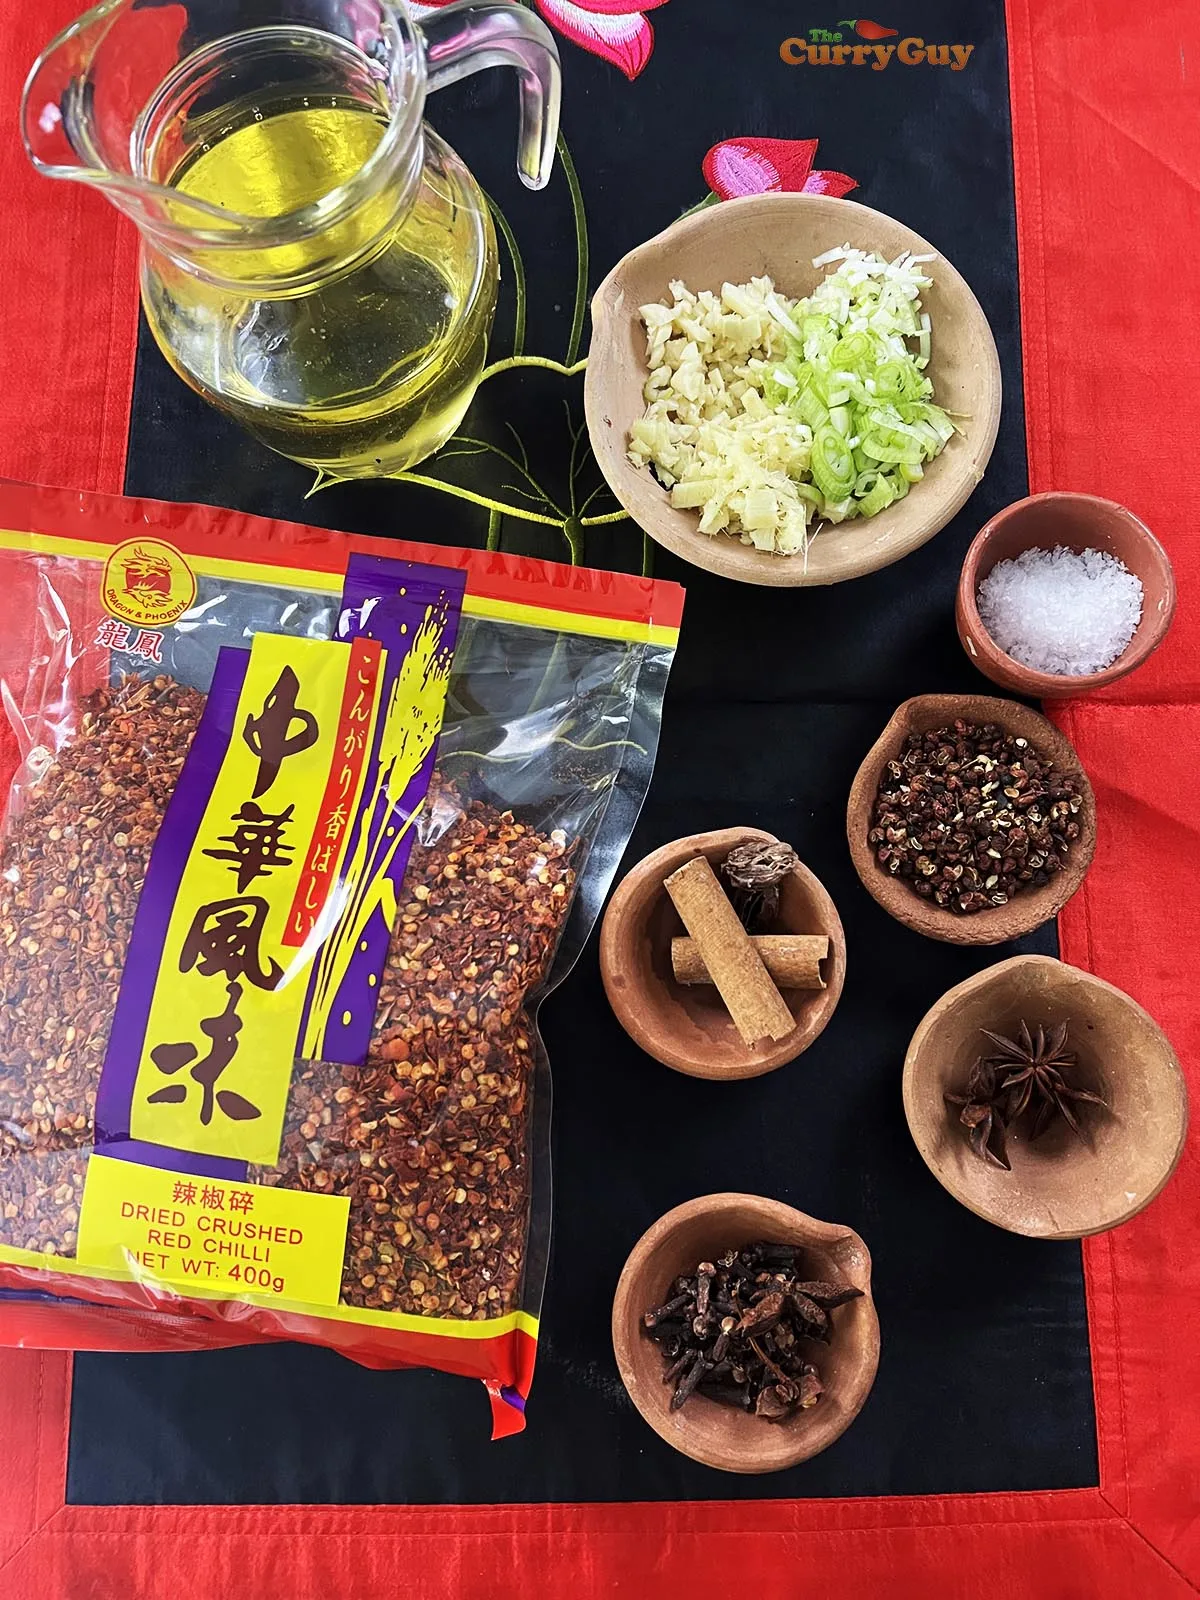 Ingredients for Chinese crispy chili oil